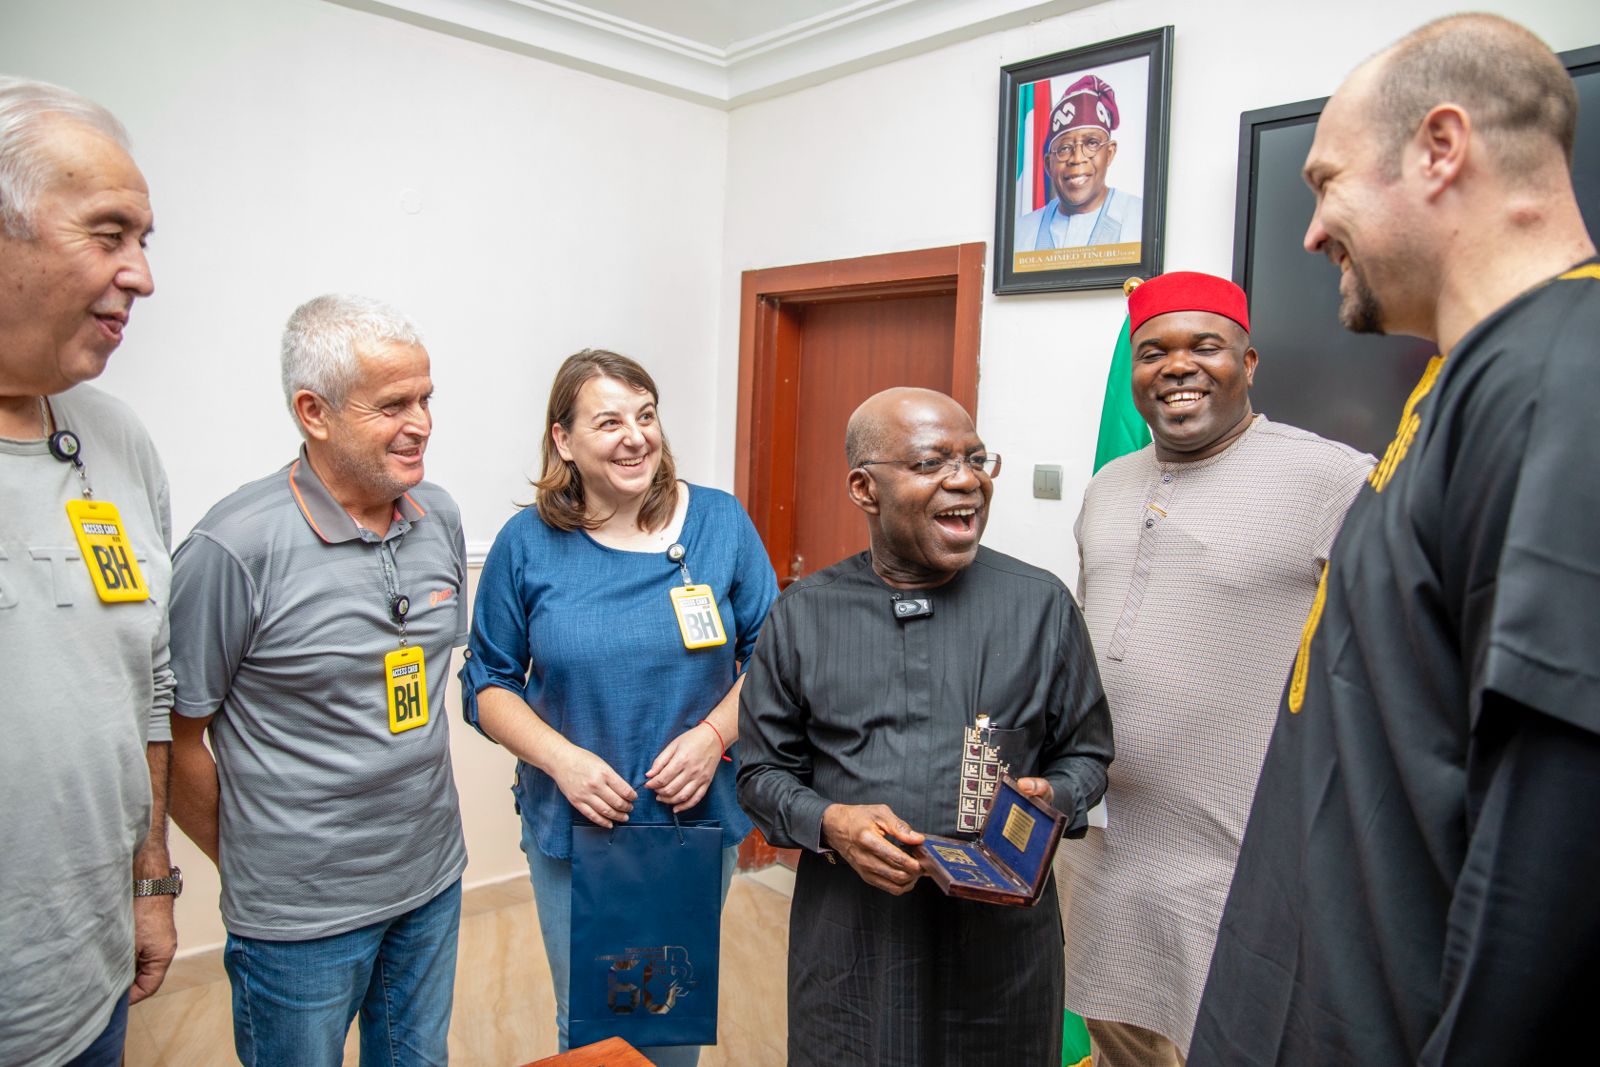 Otti Expresses Commitment To Good Governance, Seeks Trade, Agric, Partnership With Bulgaria